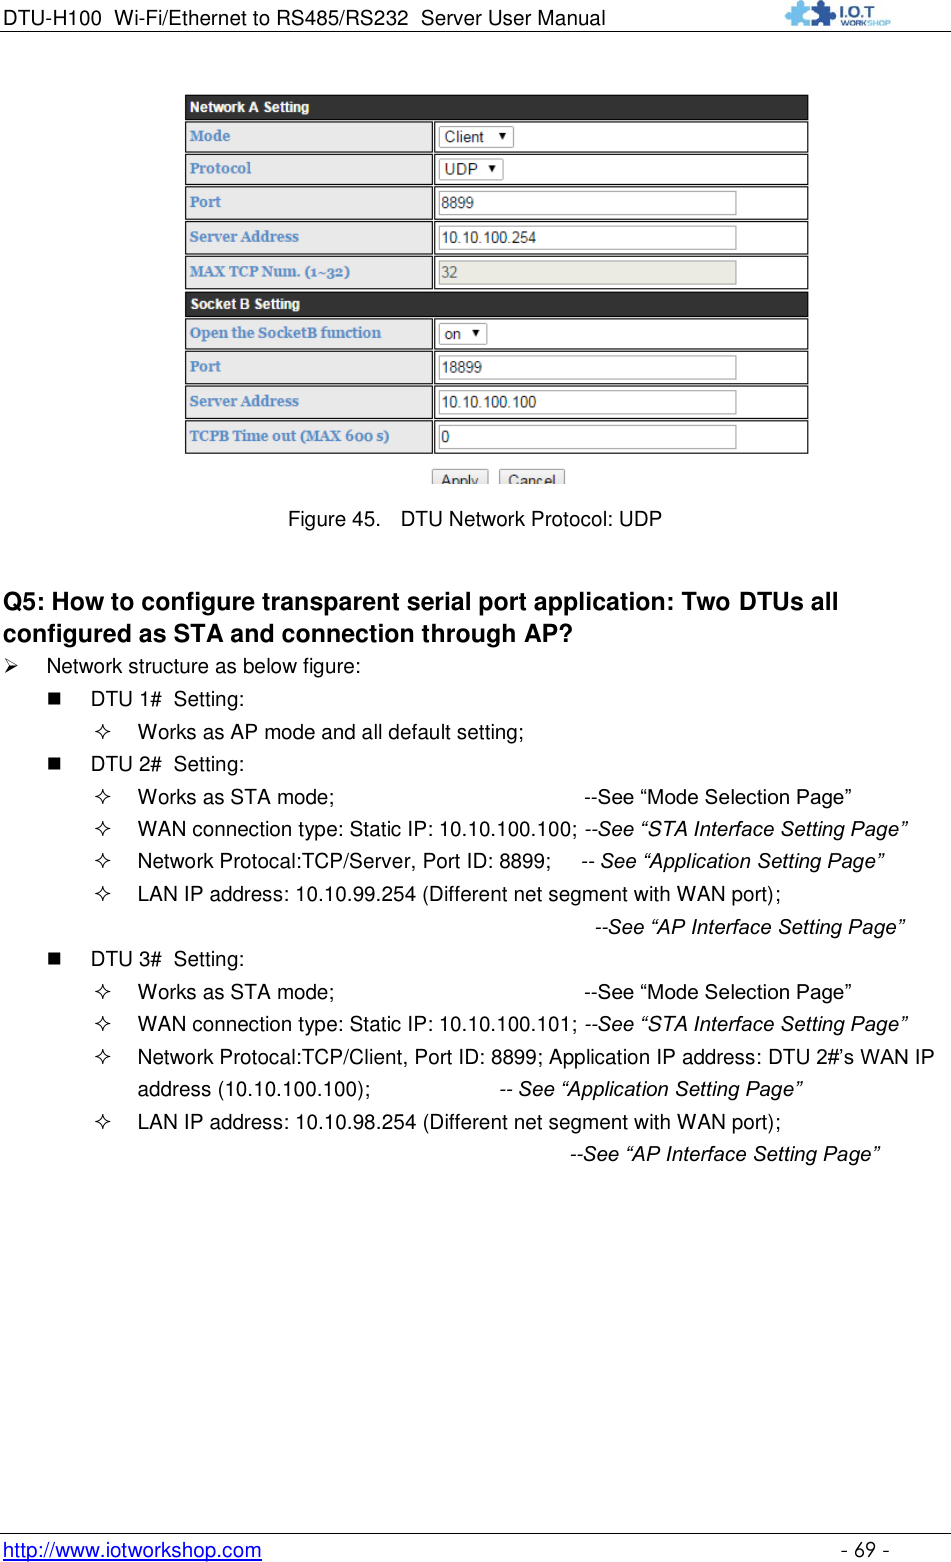 DTU-H100 Wi-Fi/Ethernet to RS485/RS232  Server User Manual    http://www.iotworkshop.com    - 69 -  Figure 45. DTU Network Protocol: UDP Q5: How to configure transparent serial port application: Two DTUs all configured as STA and connection through AP?  Network structure as below figure:  DTU 1#  Setting:   Works as AP mode and all default setting;  DTU 2#  Setting:  Works as STA mode;                                           --See “Mode Selection Page”  WAN connection type: Static IP: 10.10.100.100; --See “STA Interface Setting Page”                                                                Network Protocal:TCP/Server, Port ID: 8899;     -- See “Application Setting Page”  LAN IP address: 10.10.99.254 (Different net segment with WAN port); --See “AP Interface Setting Page”   DTU 3#  Setting:  Works as STA mode;                                           --See “Mode Selection Page”  WAN connection type: Static IP: 10.10.100.101; --See “STA Interface Setting Page”                                                                Network Protocal:TCP/Client, Port ID: 8899; Application IP address: DTU 2#‟s WAN IP address (10.10.100.100);                      -- See “Application Setting Page”  LAN IP address: 10.10.98.254 (Different net segment with WAN port); --See “AP Interface Setting Page”  